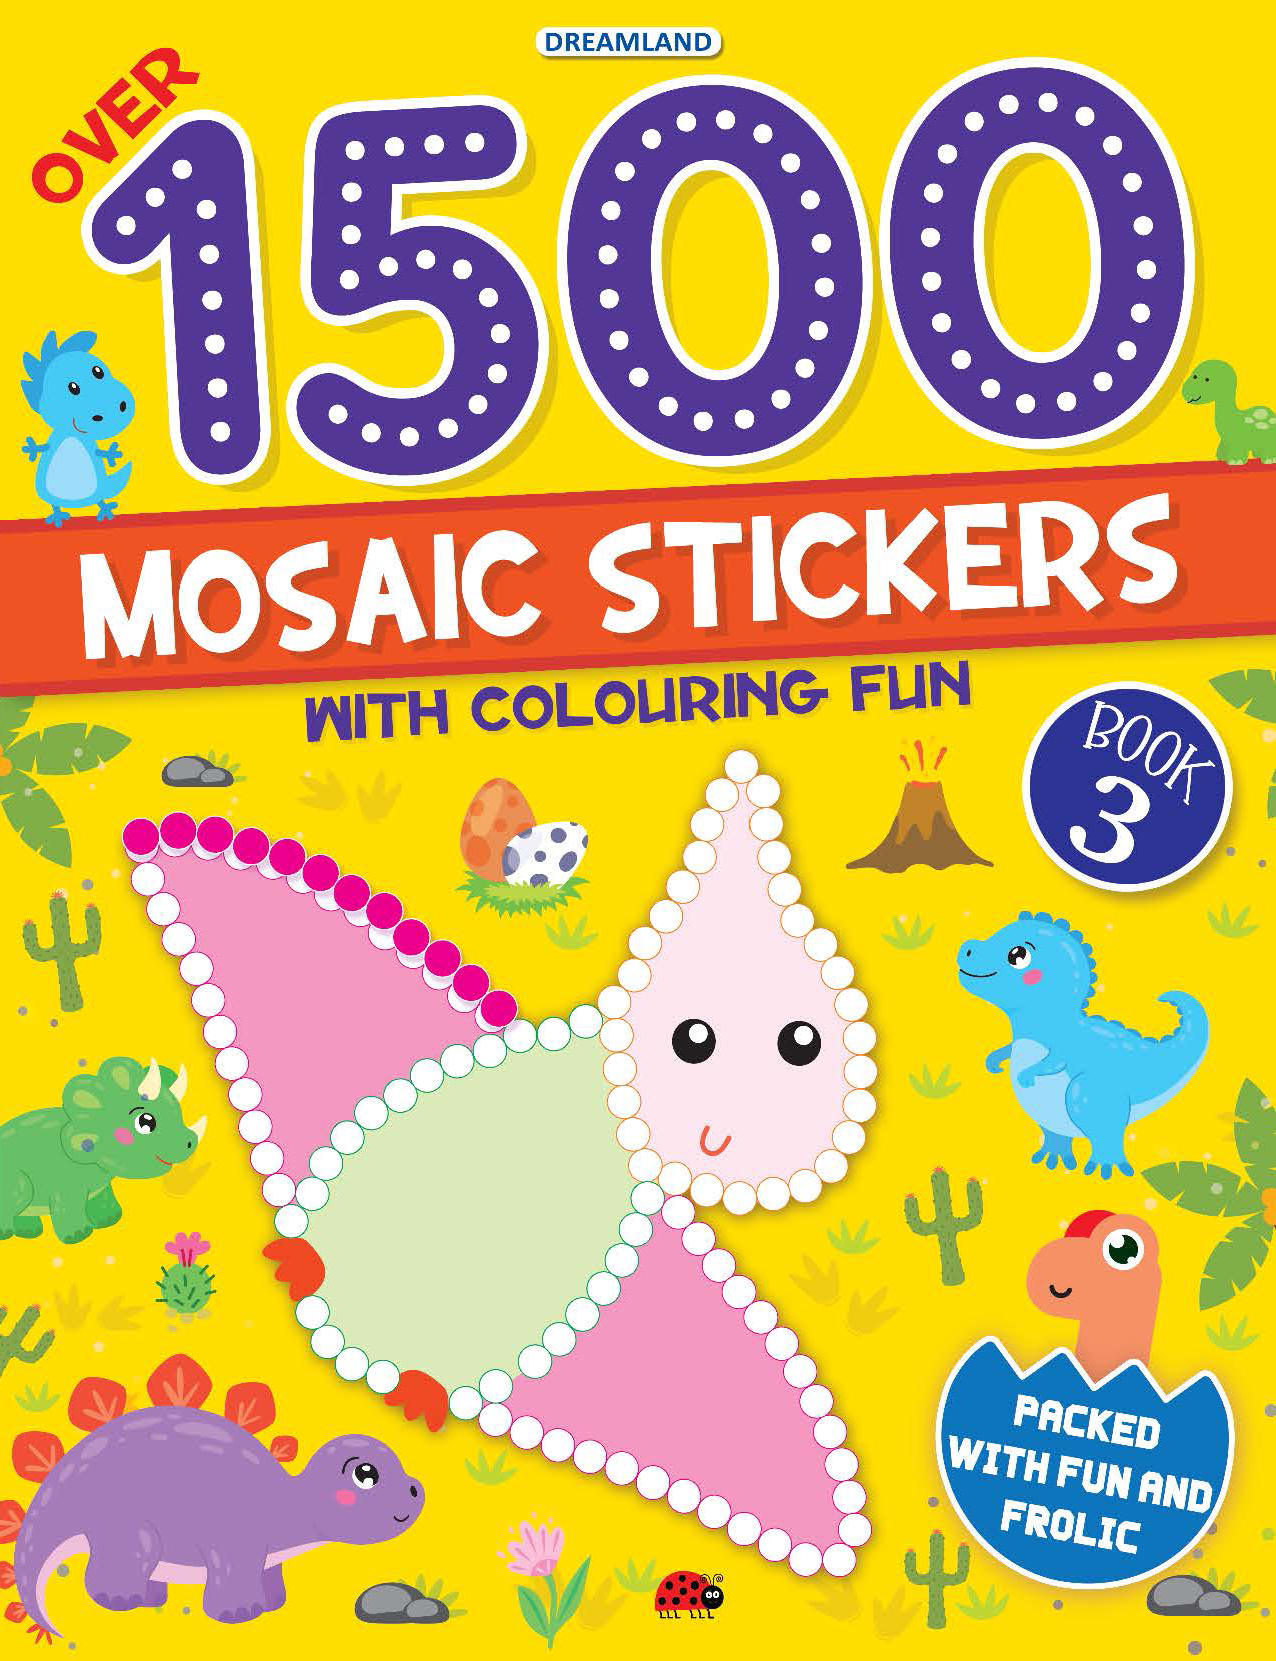 Buy Dreamland Publications 1500 Mosaic Stickers Book 2 with Colouring Fun - Sticker  Book for Kids Age 4 - 8 years Online at Best Price